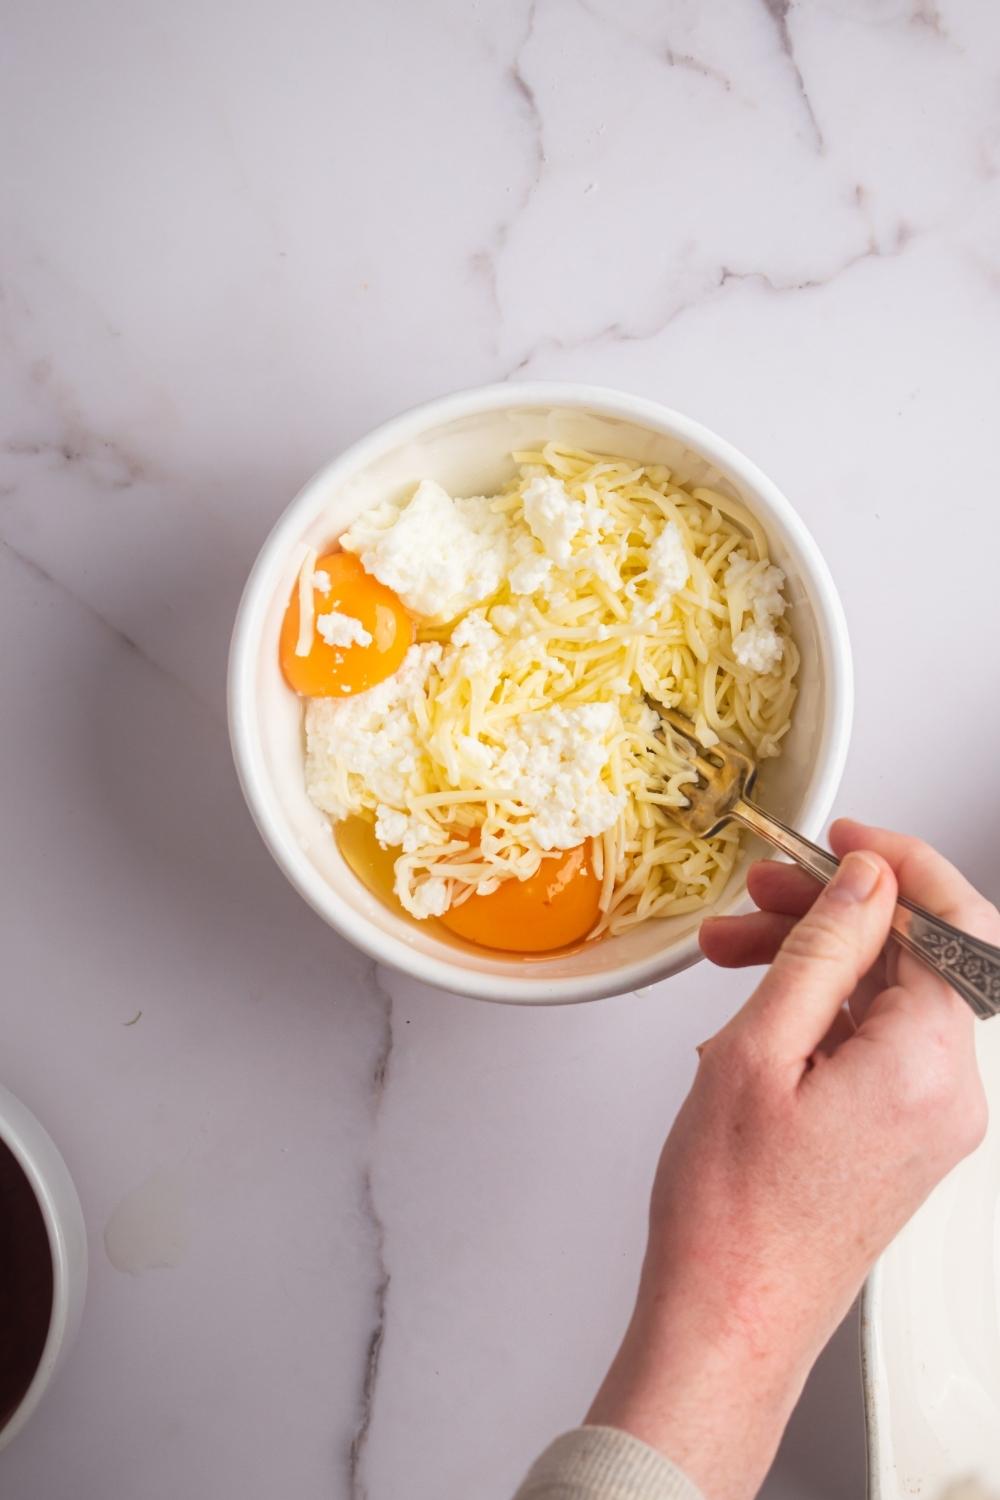 A hand holding a fork that is submerged in a white bowl filled with two eggs, ricotta cheese, and shredded Parmesan cheese.